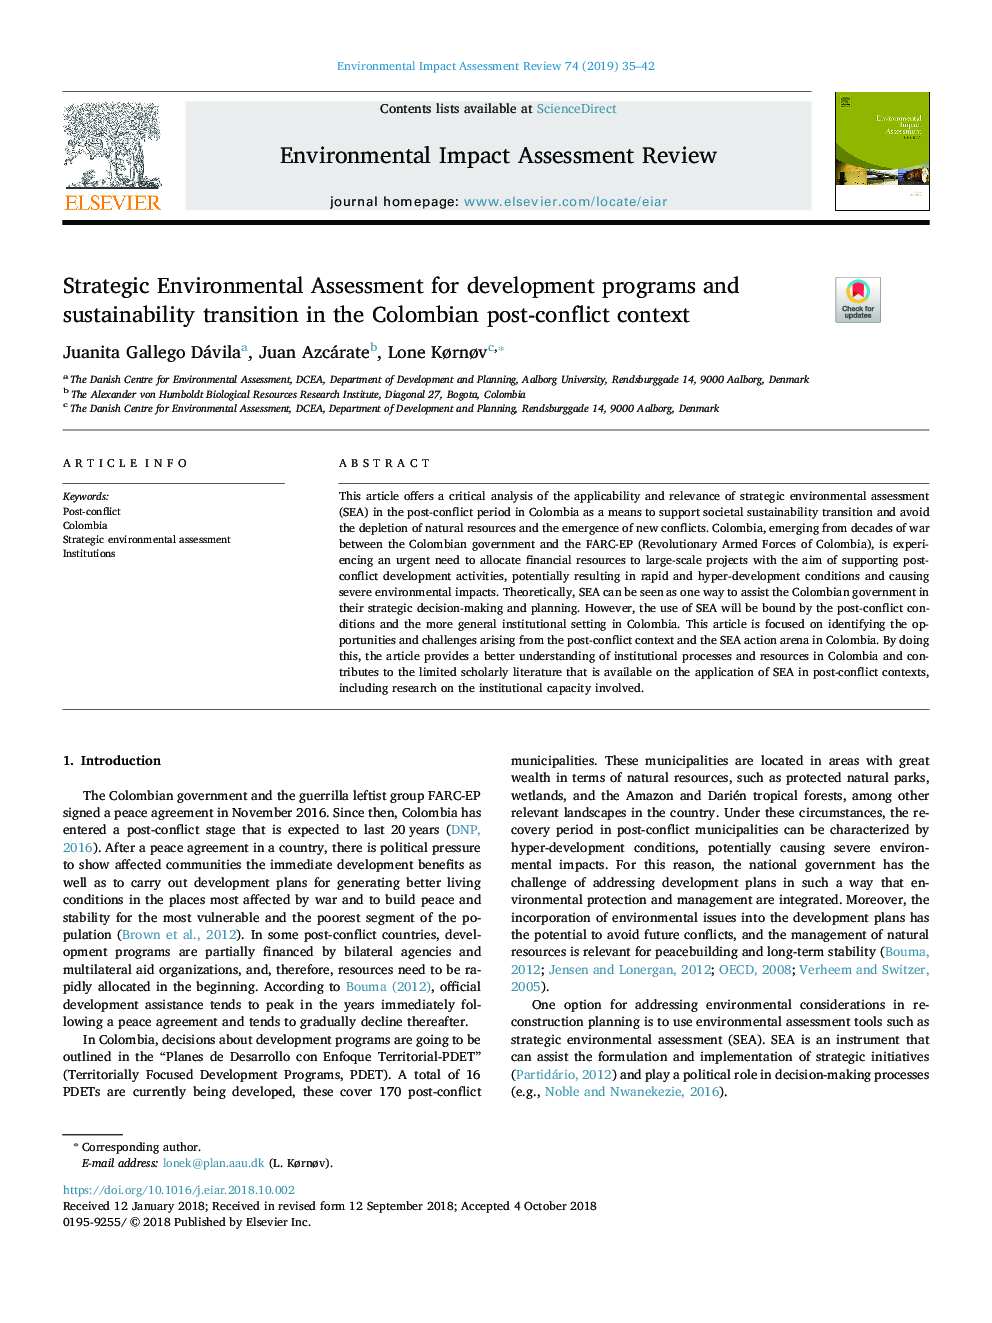 Strategic Environmental Assessment for development programs and sustainability transition in the Colombian post-conflict context